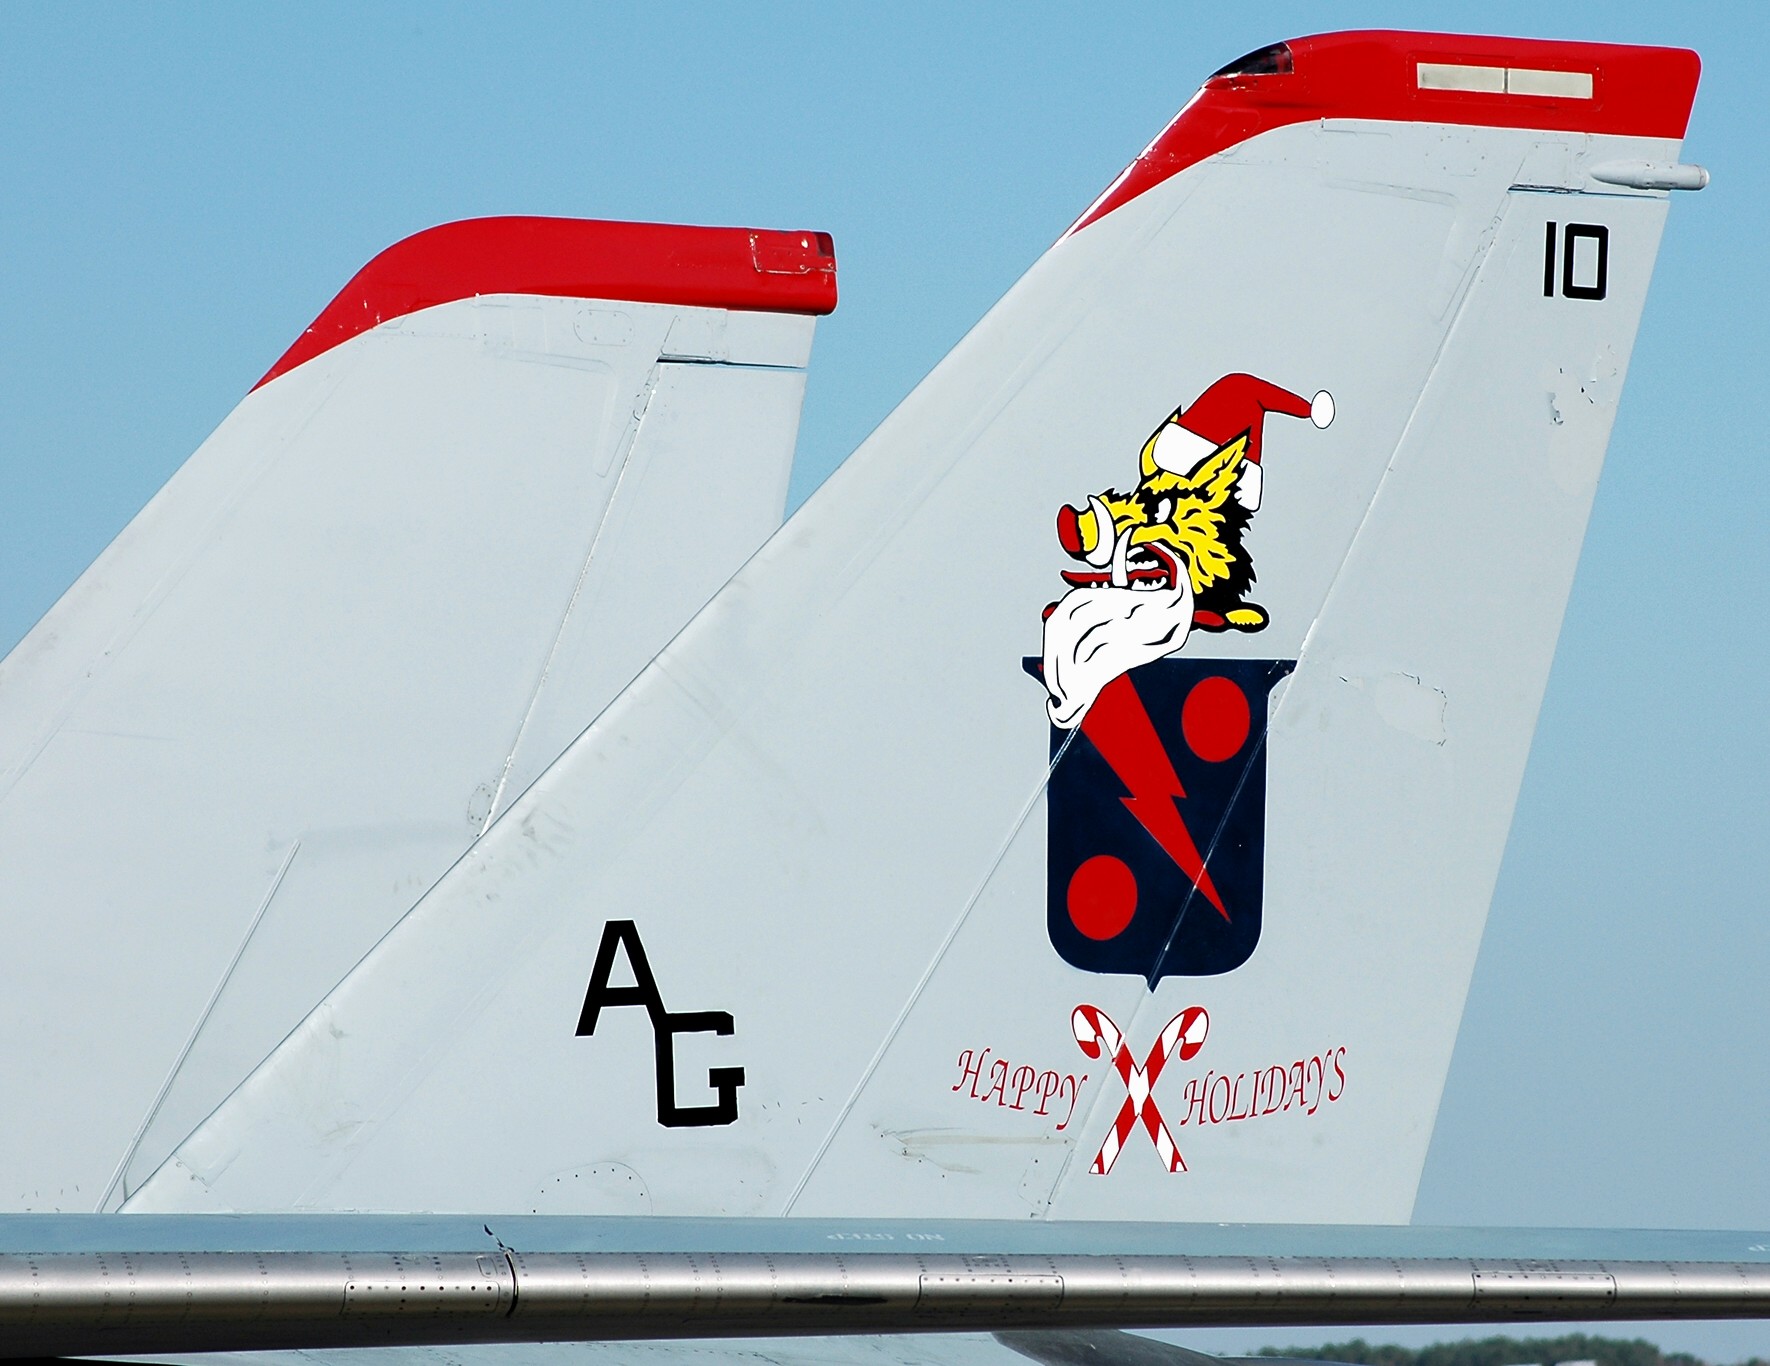 vf-11 red rippers fighter squadron us navy fitron f-14b tomcat carrier air wing cvw-7 nas oceana virginia 50